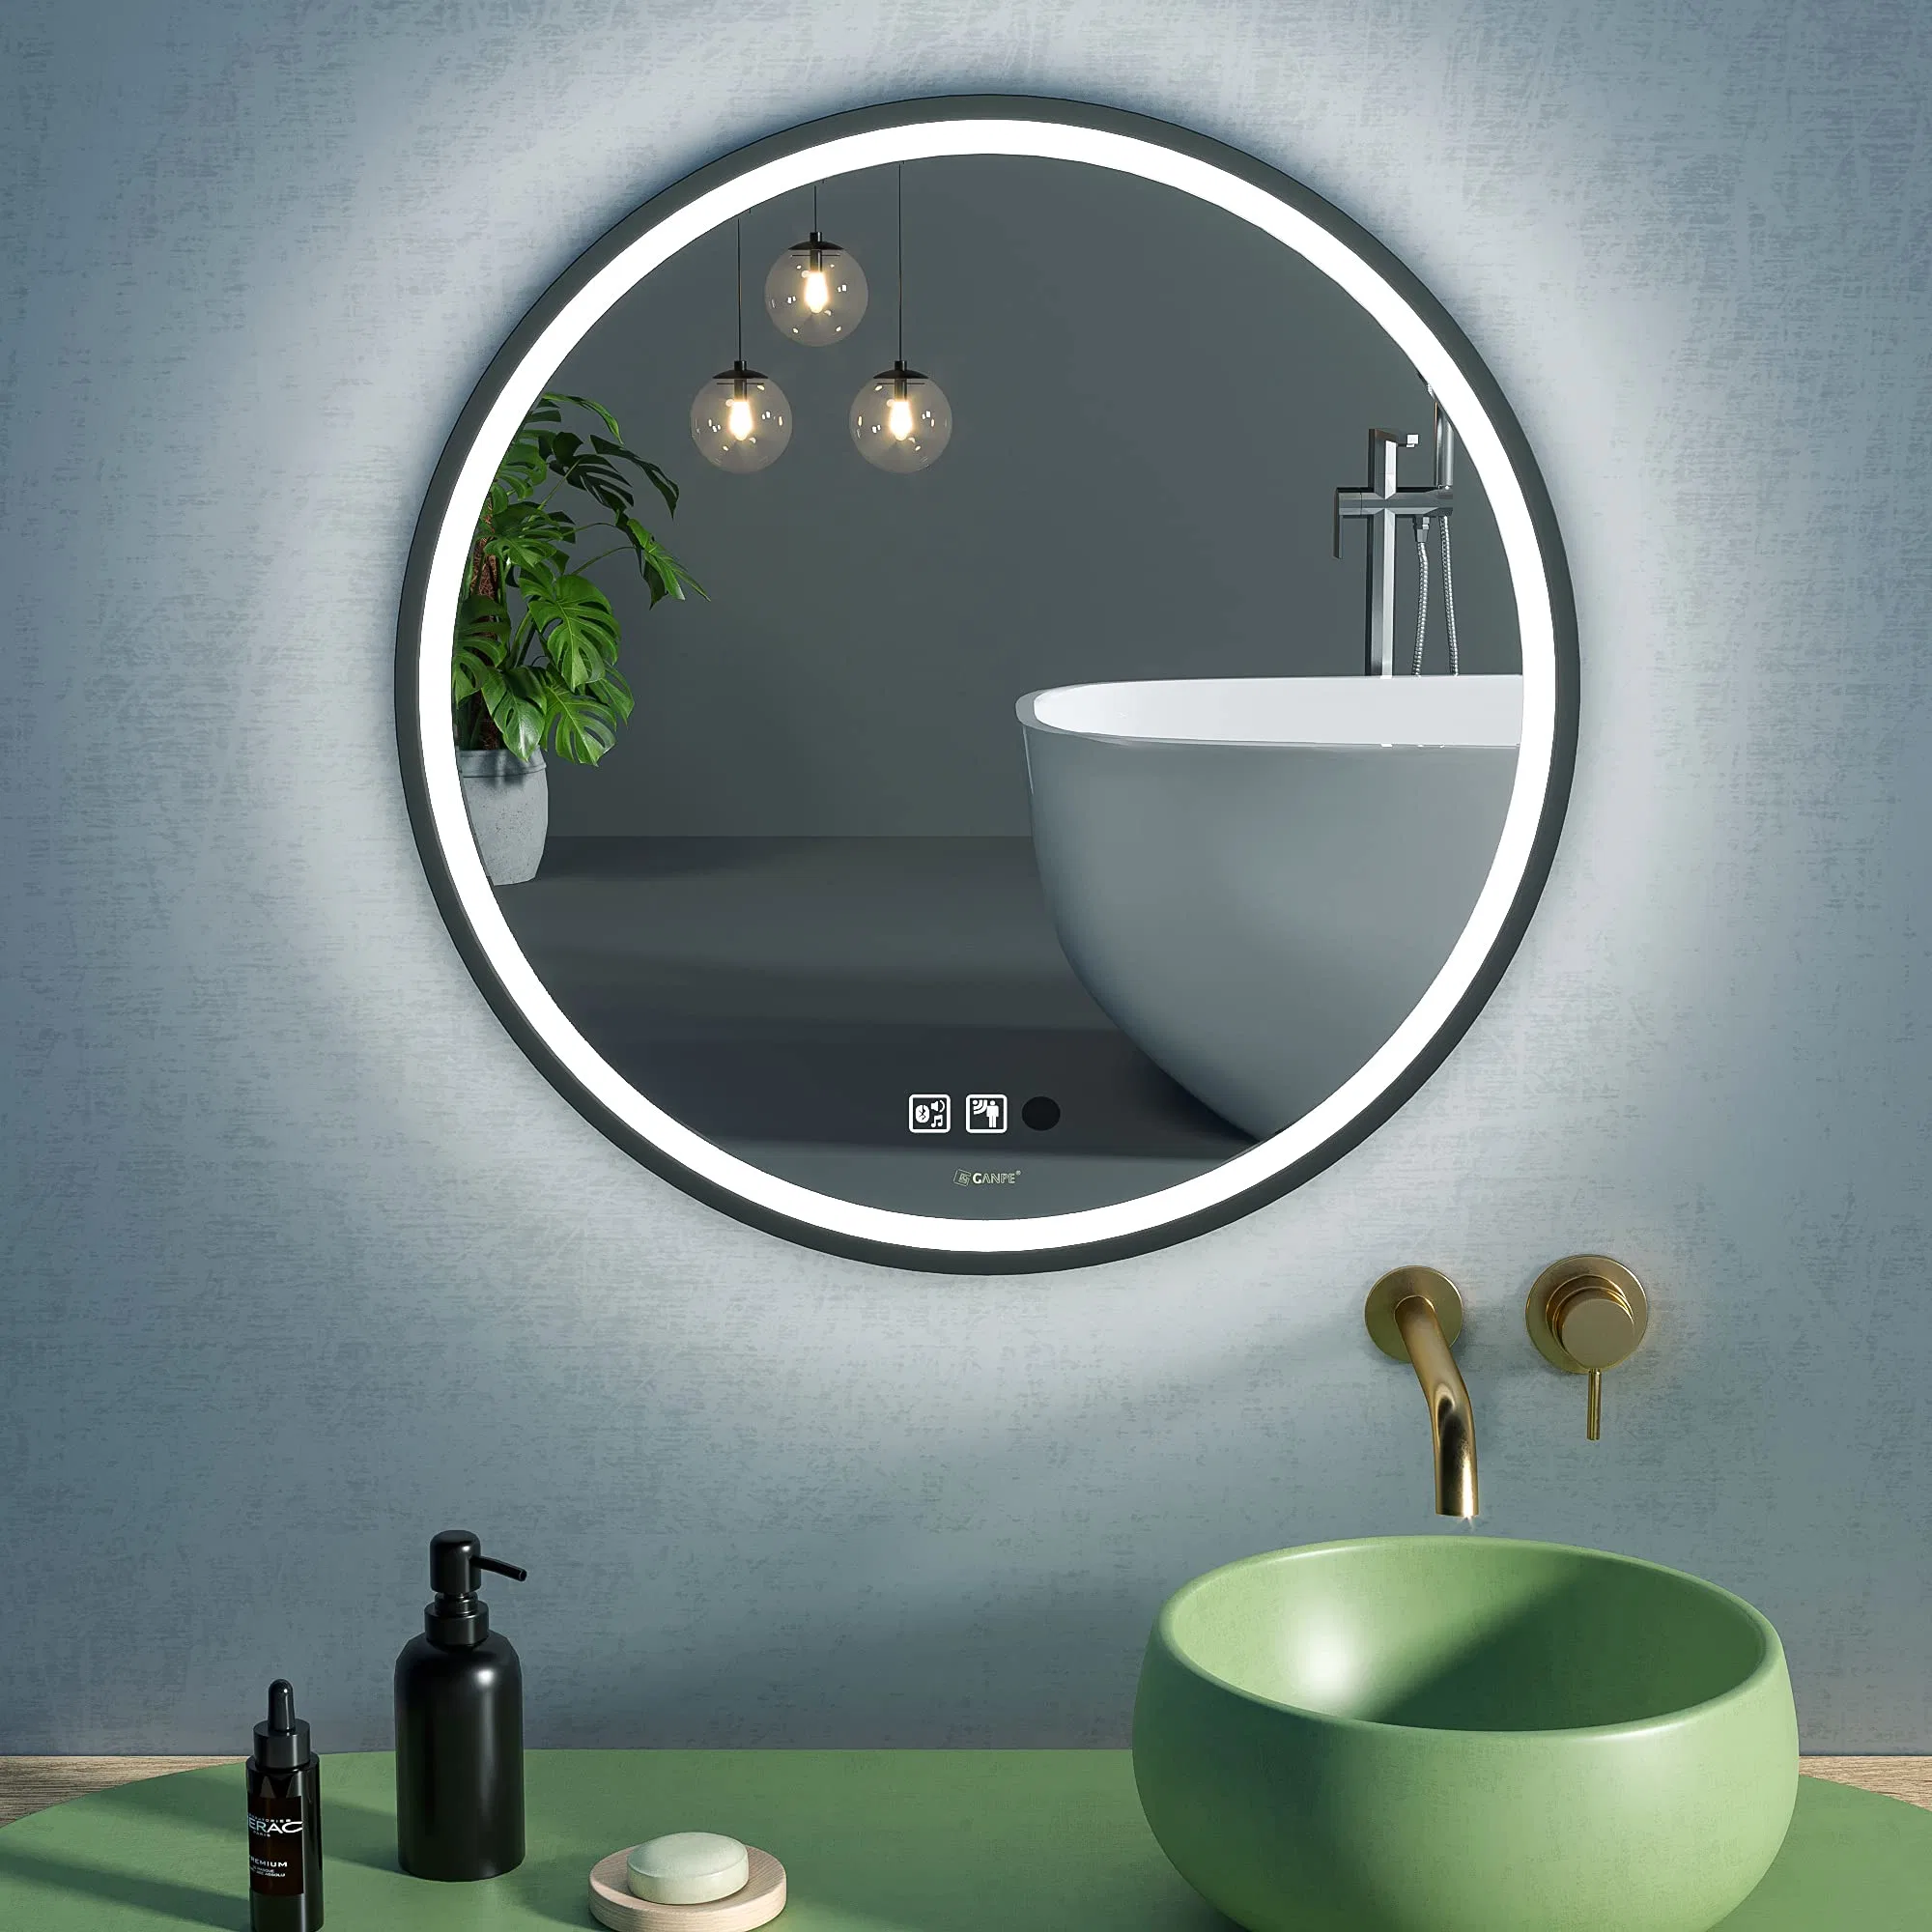 Modern Round Shape Home Decor Illuminated Smart Makeup Mirror with Lights Wall Hanging Framed LED Bathroom Mirror